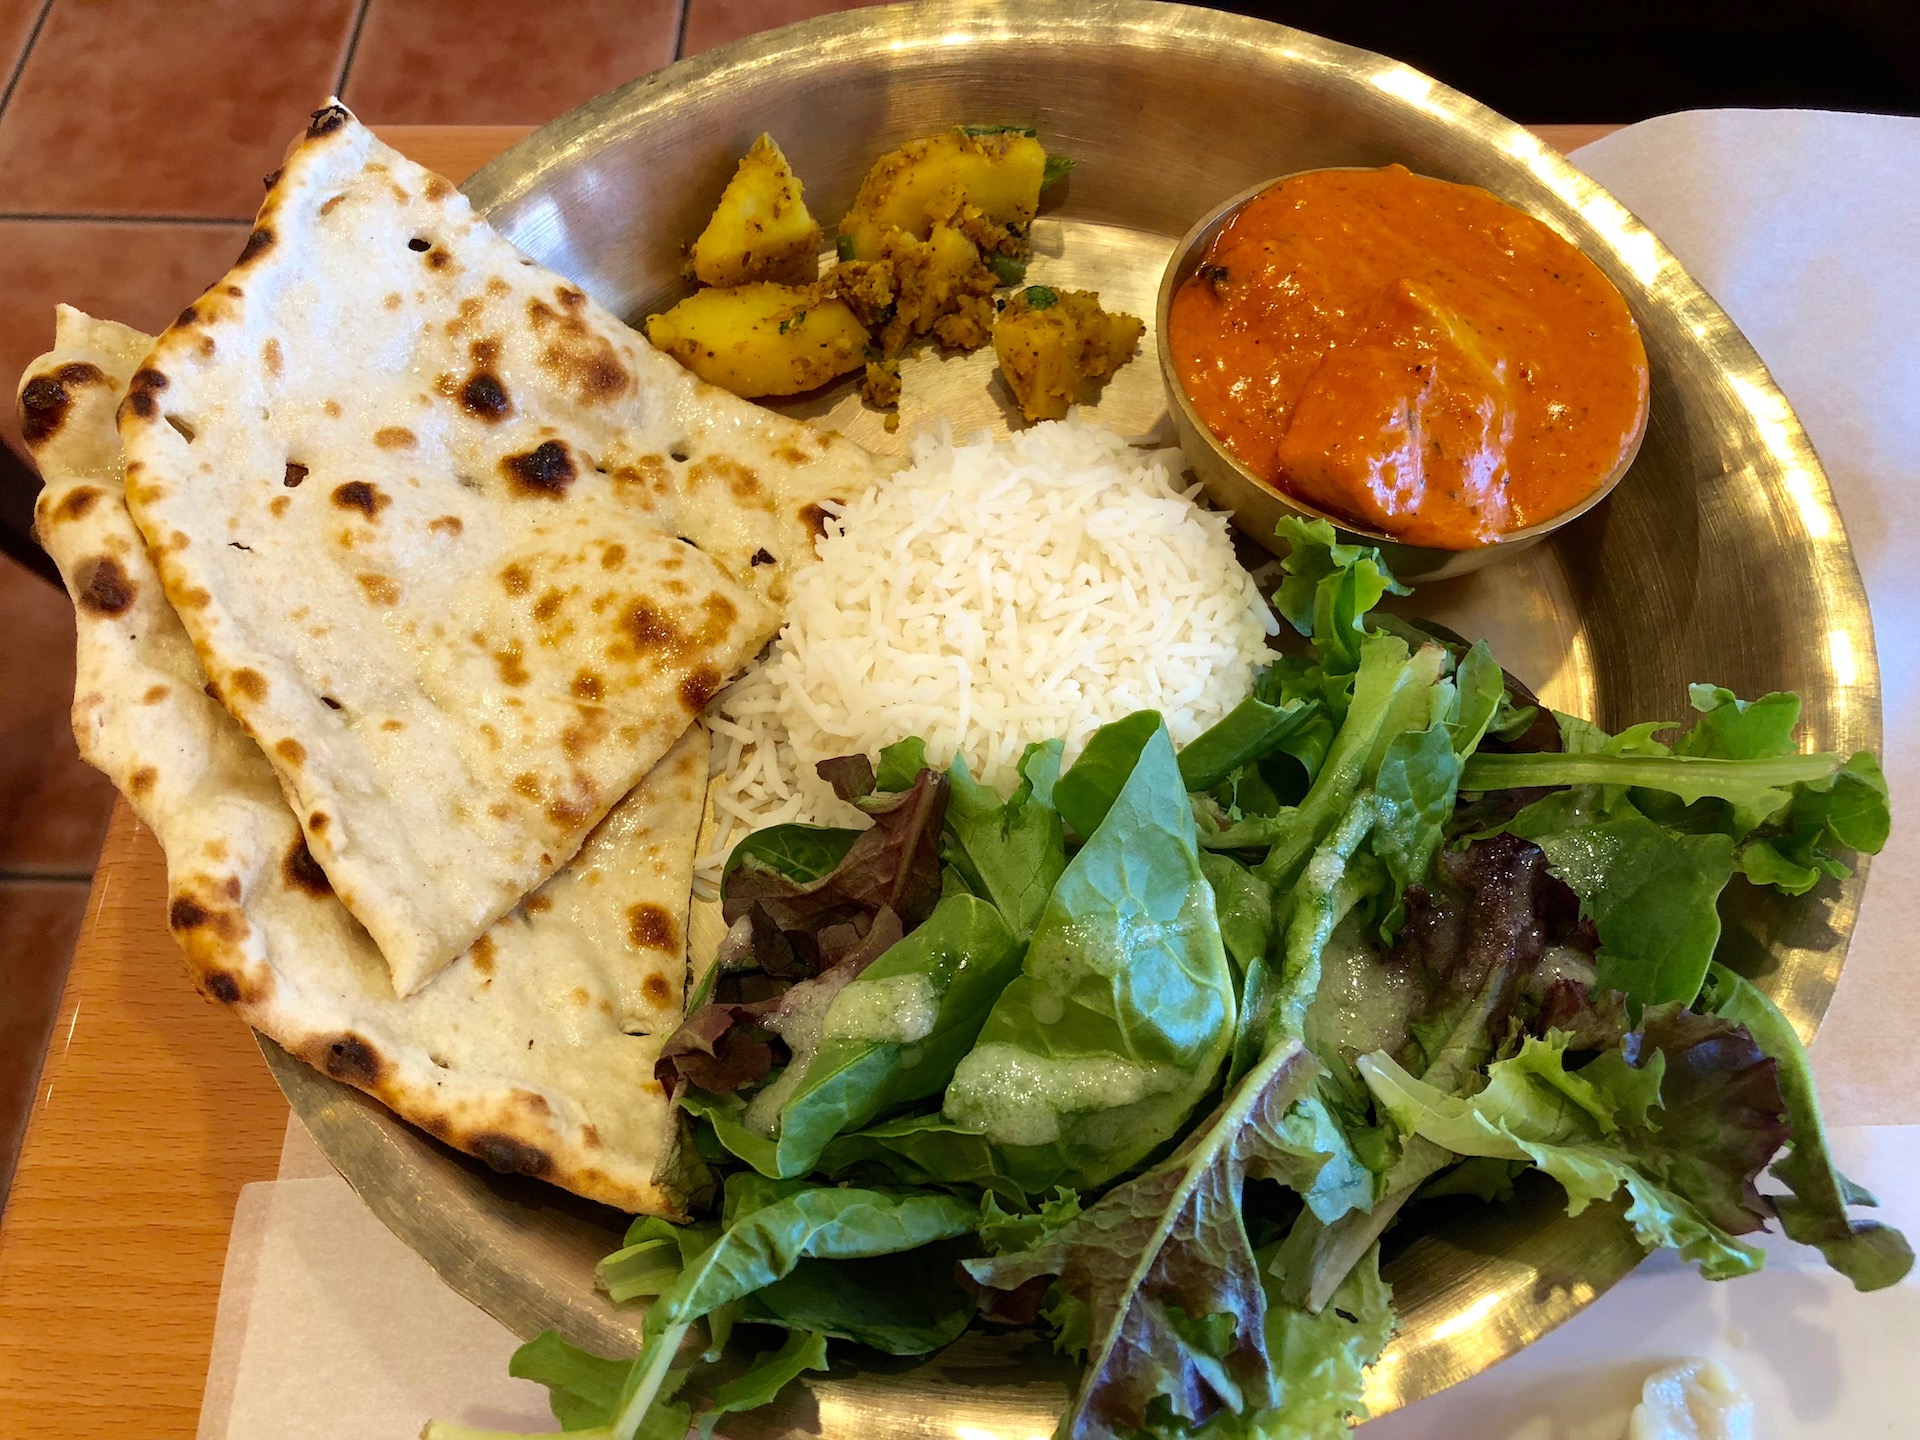 Cuisine of Nepal’s signature chicken and cashew cream curry, served as a thali platter at lunch